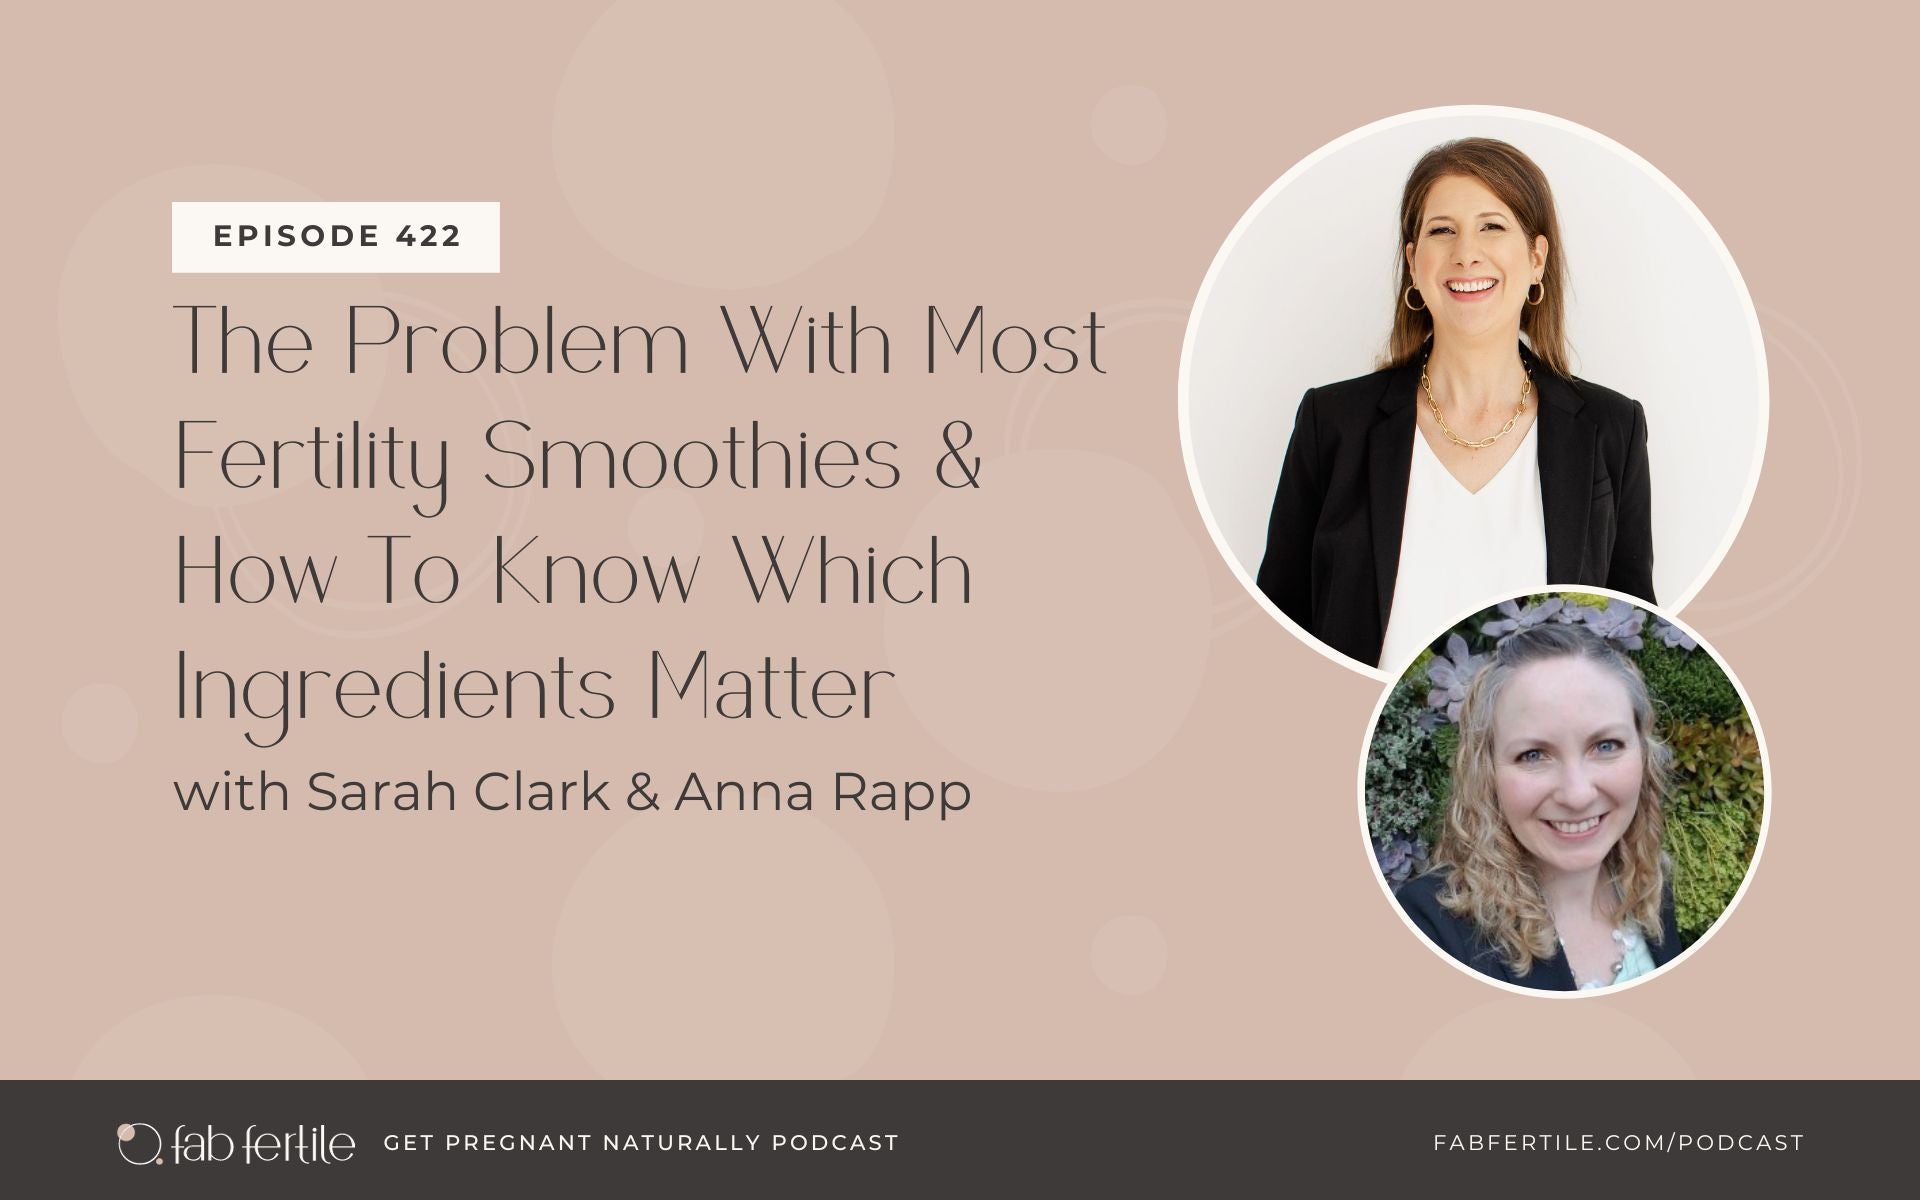 The Problem With Most Fertility Smoothies & How To Know Which Ingredients Matter with Anna Rapp